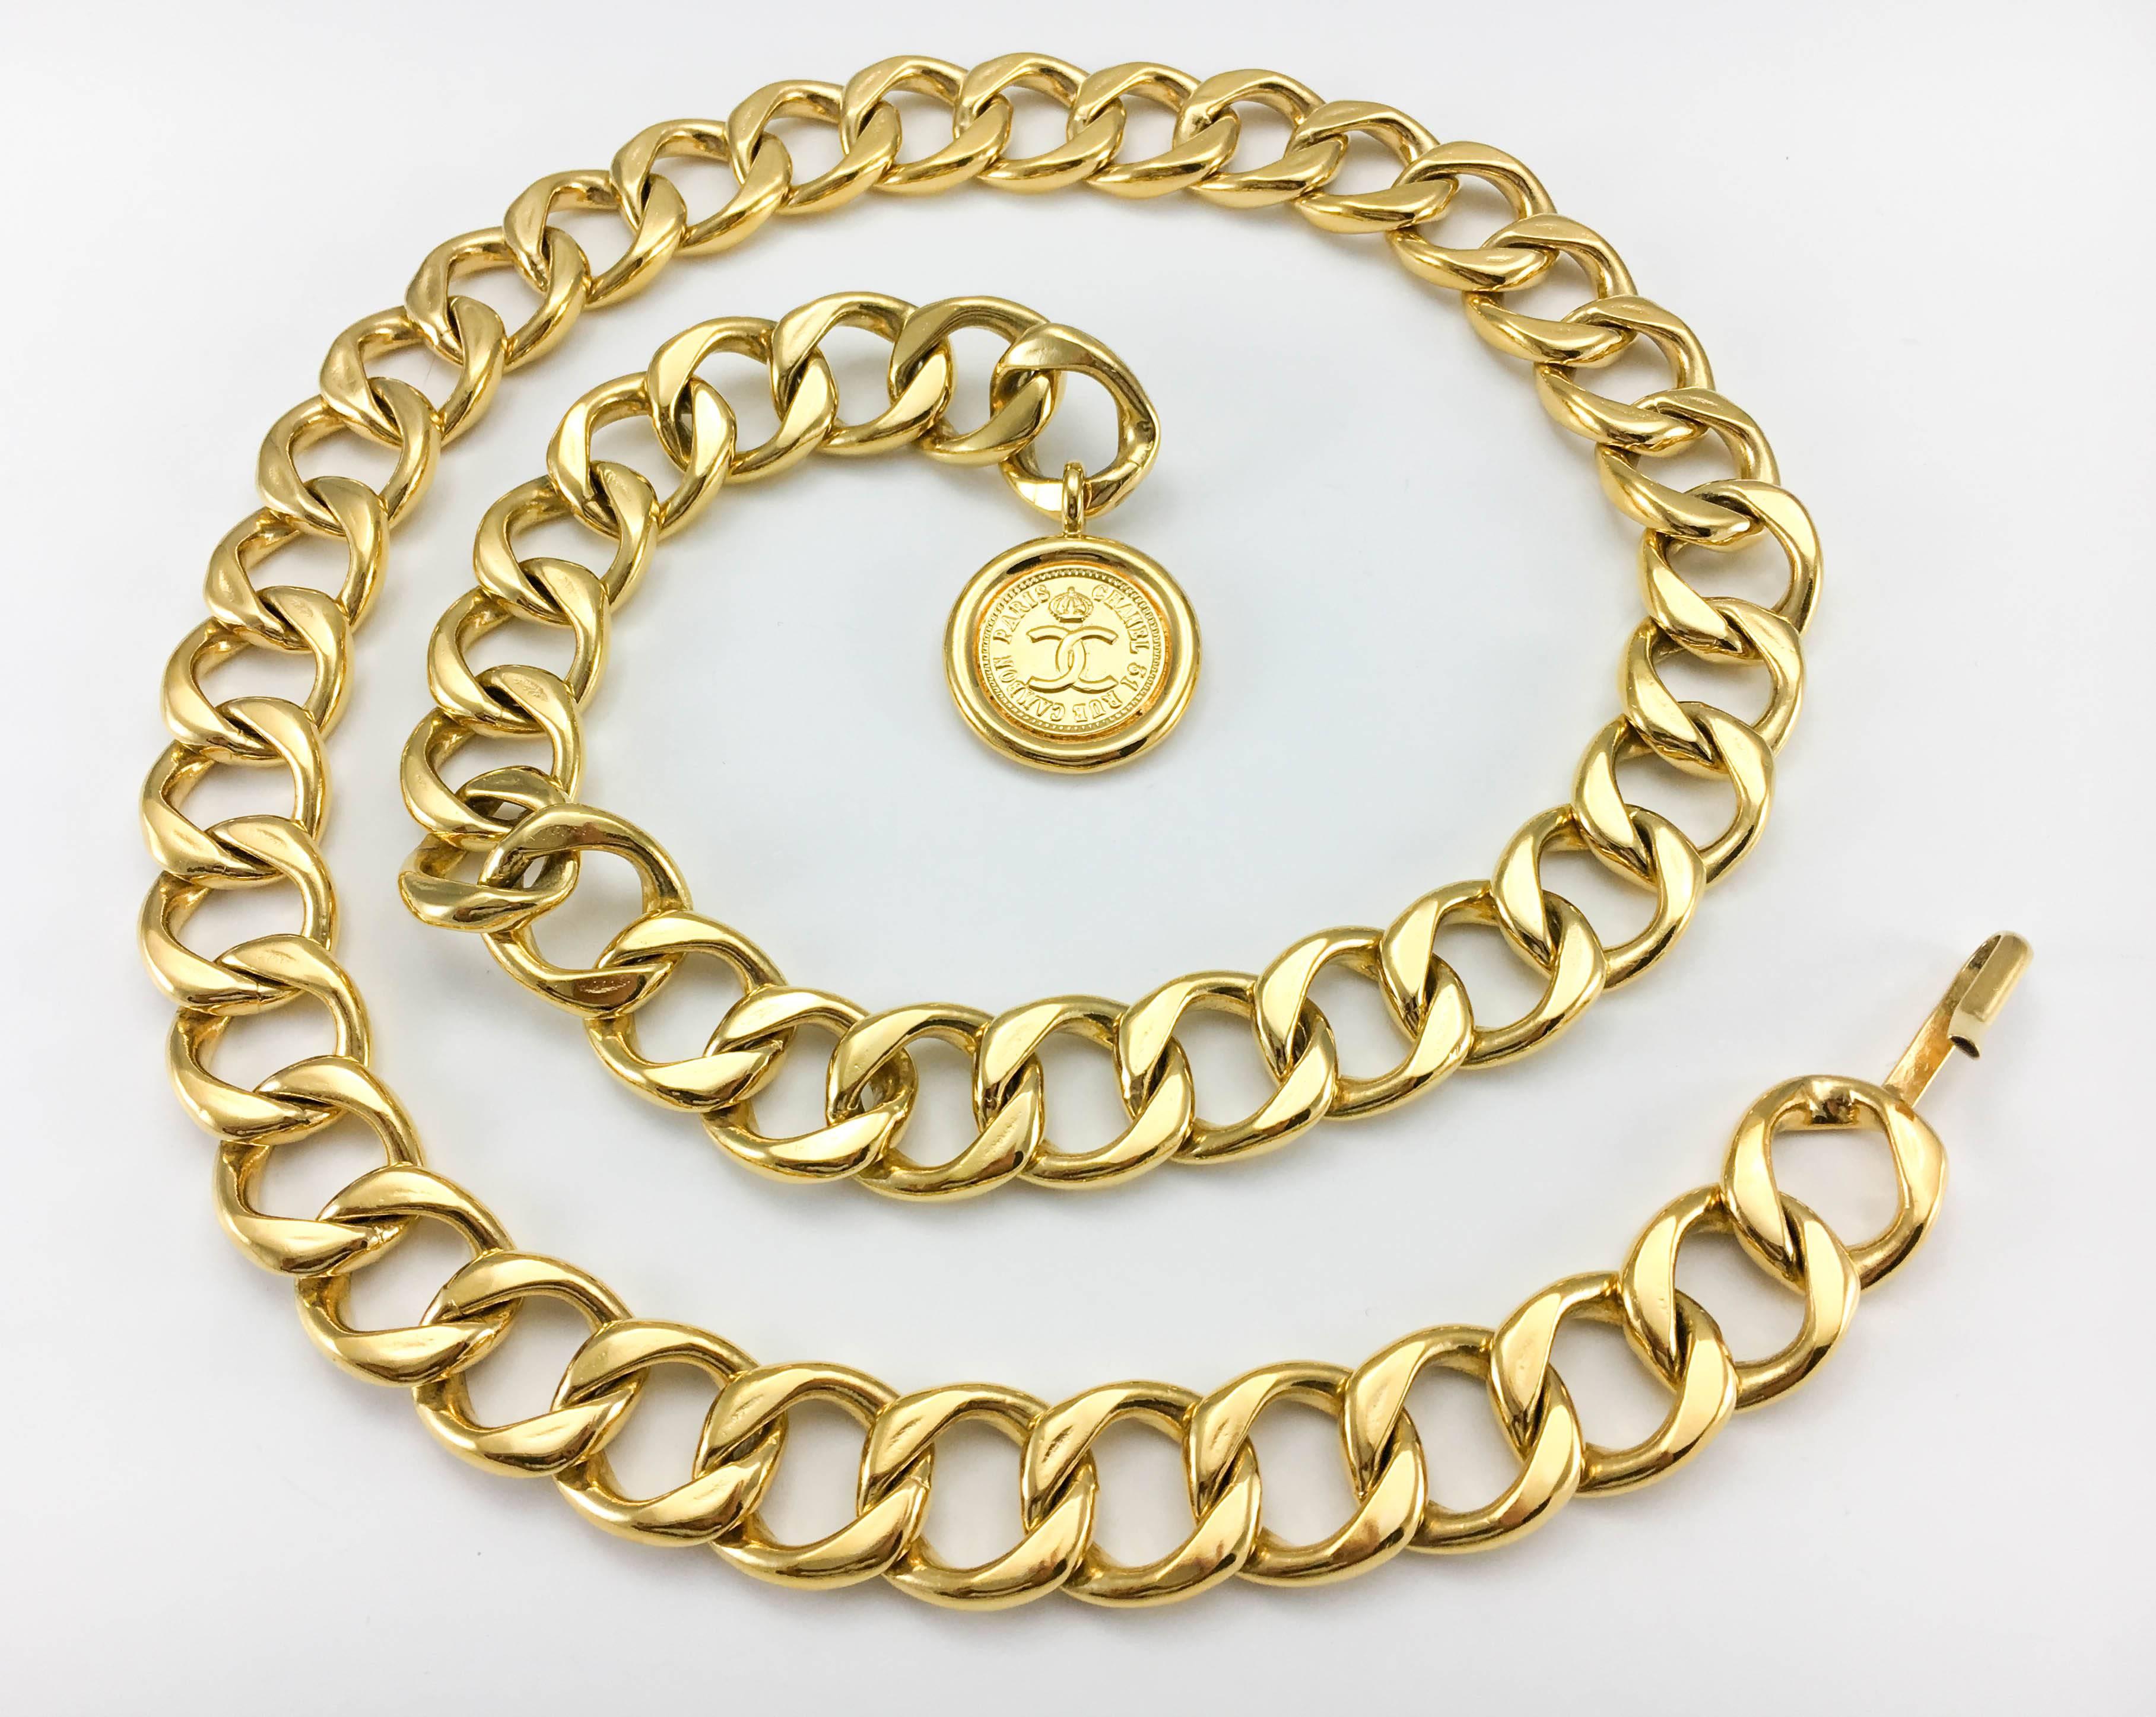 1980's Chanel Gold-Tone Medallion Chain Necklace / Belt In Excellent Condition In London, Chelsea